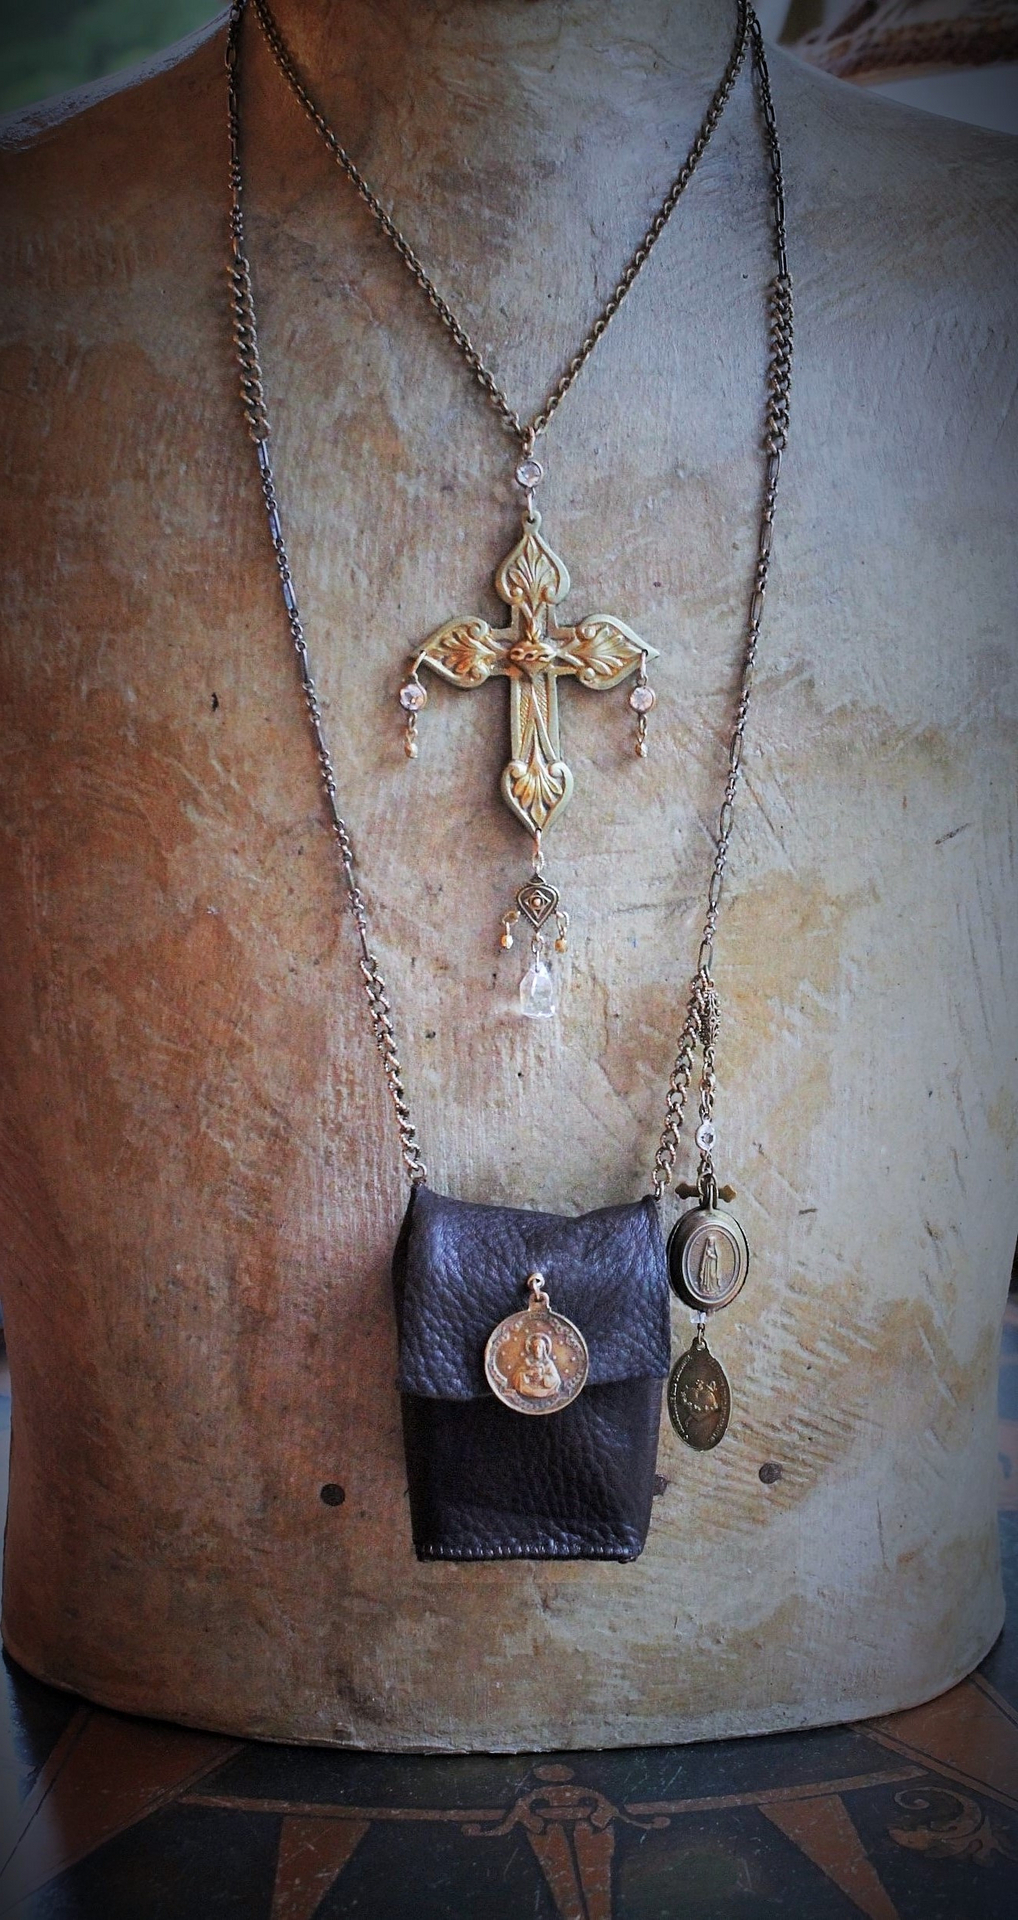 Paradise Lost Necklace Set w/Hand Stitched Distressed Leather Pouch,2 Volume Miniature Paradise Lost (John Milton) Books,Antique French Reliquary Locket,Antique Sacred Heart Cross & More!